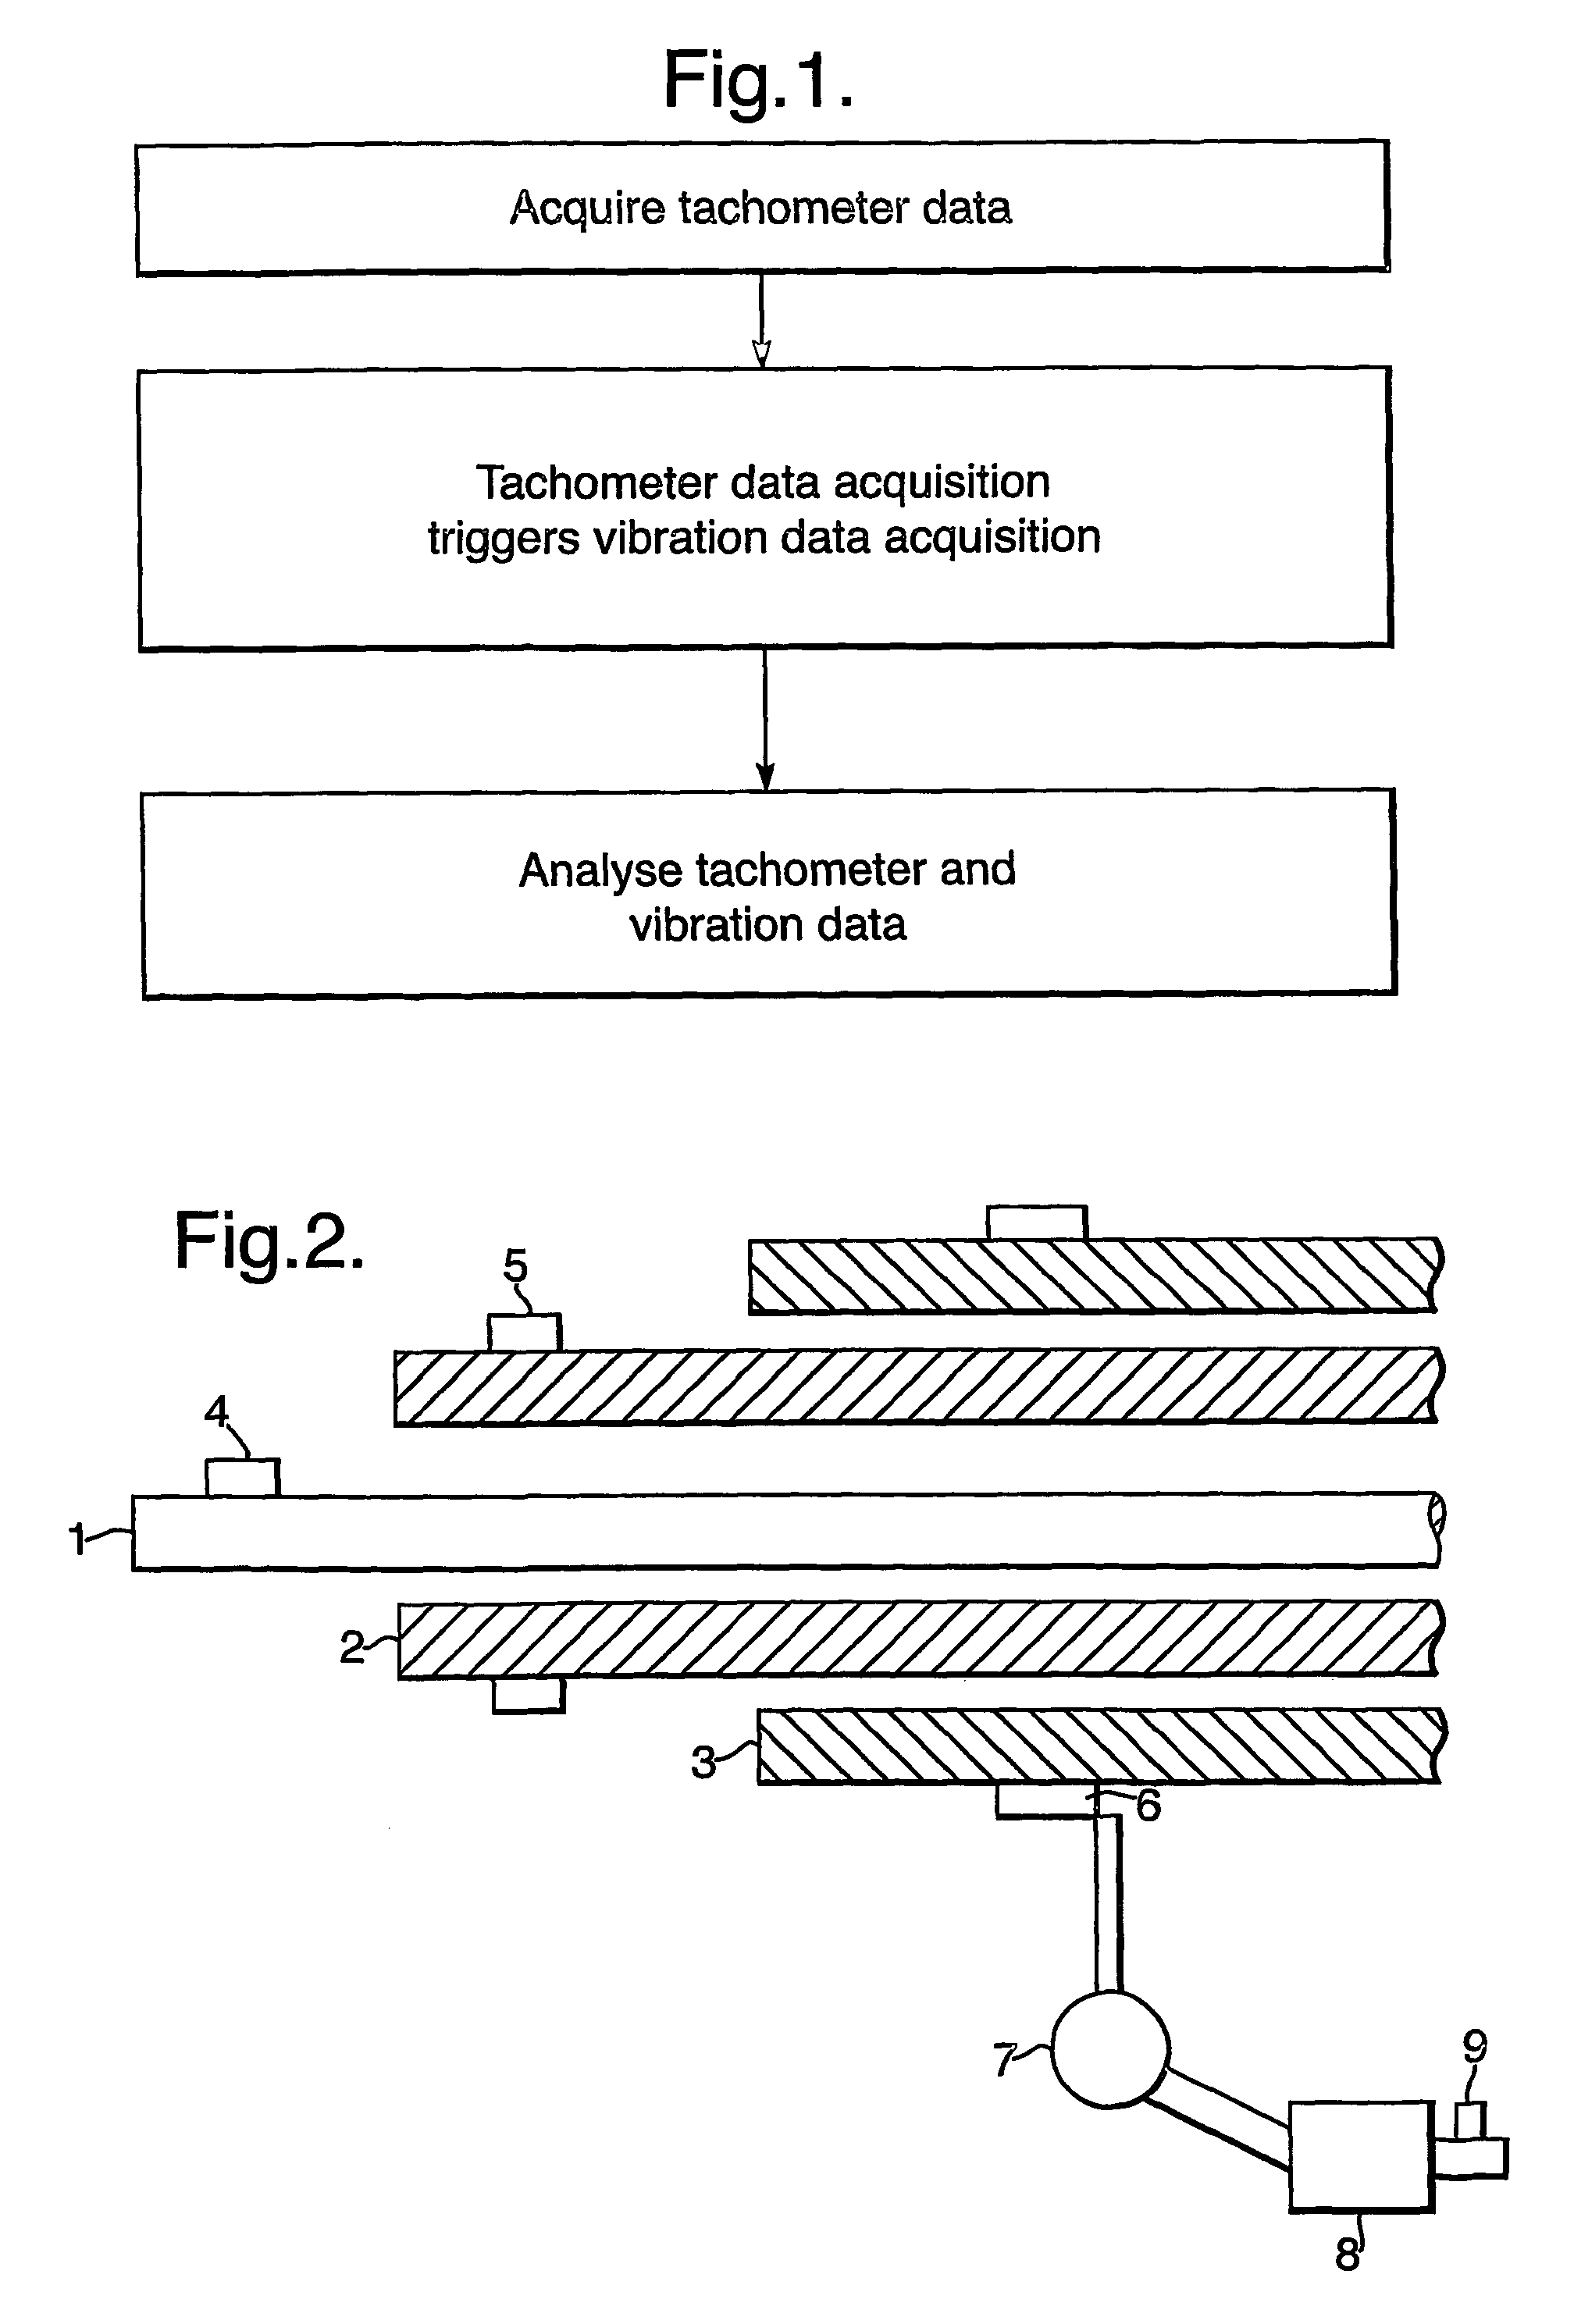 Method and system for analysing tachometer and vibration data from an apparatus having one or more rotary components